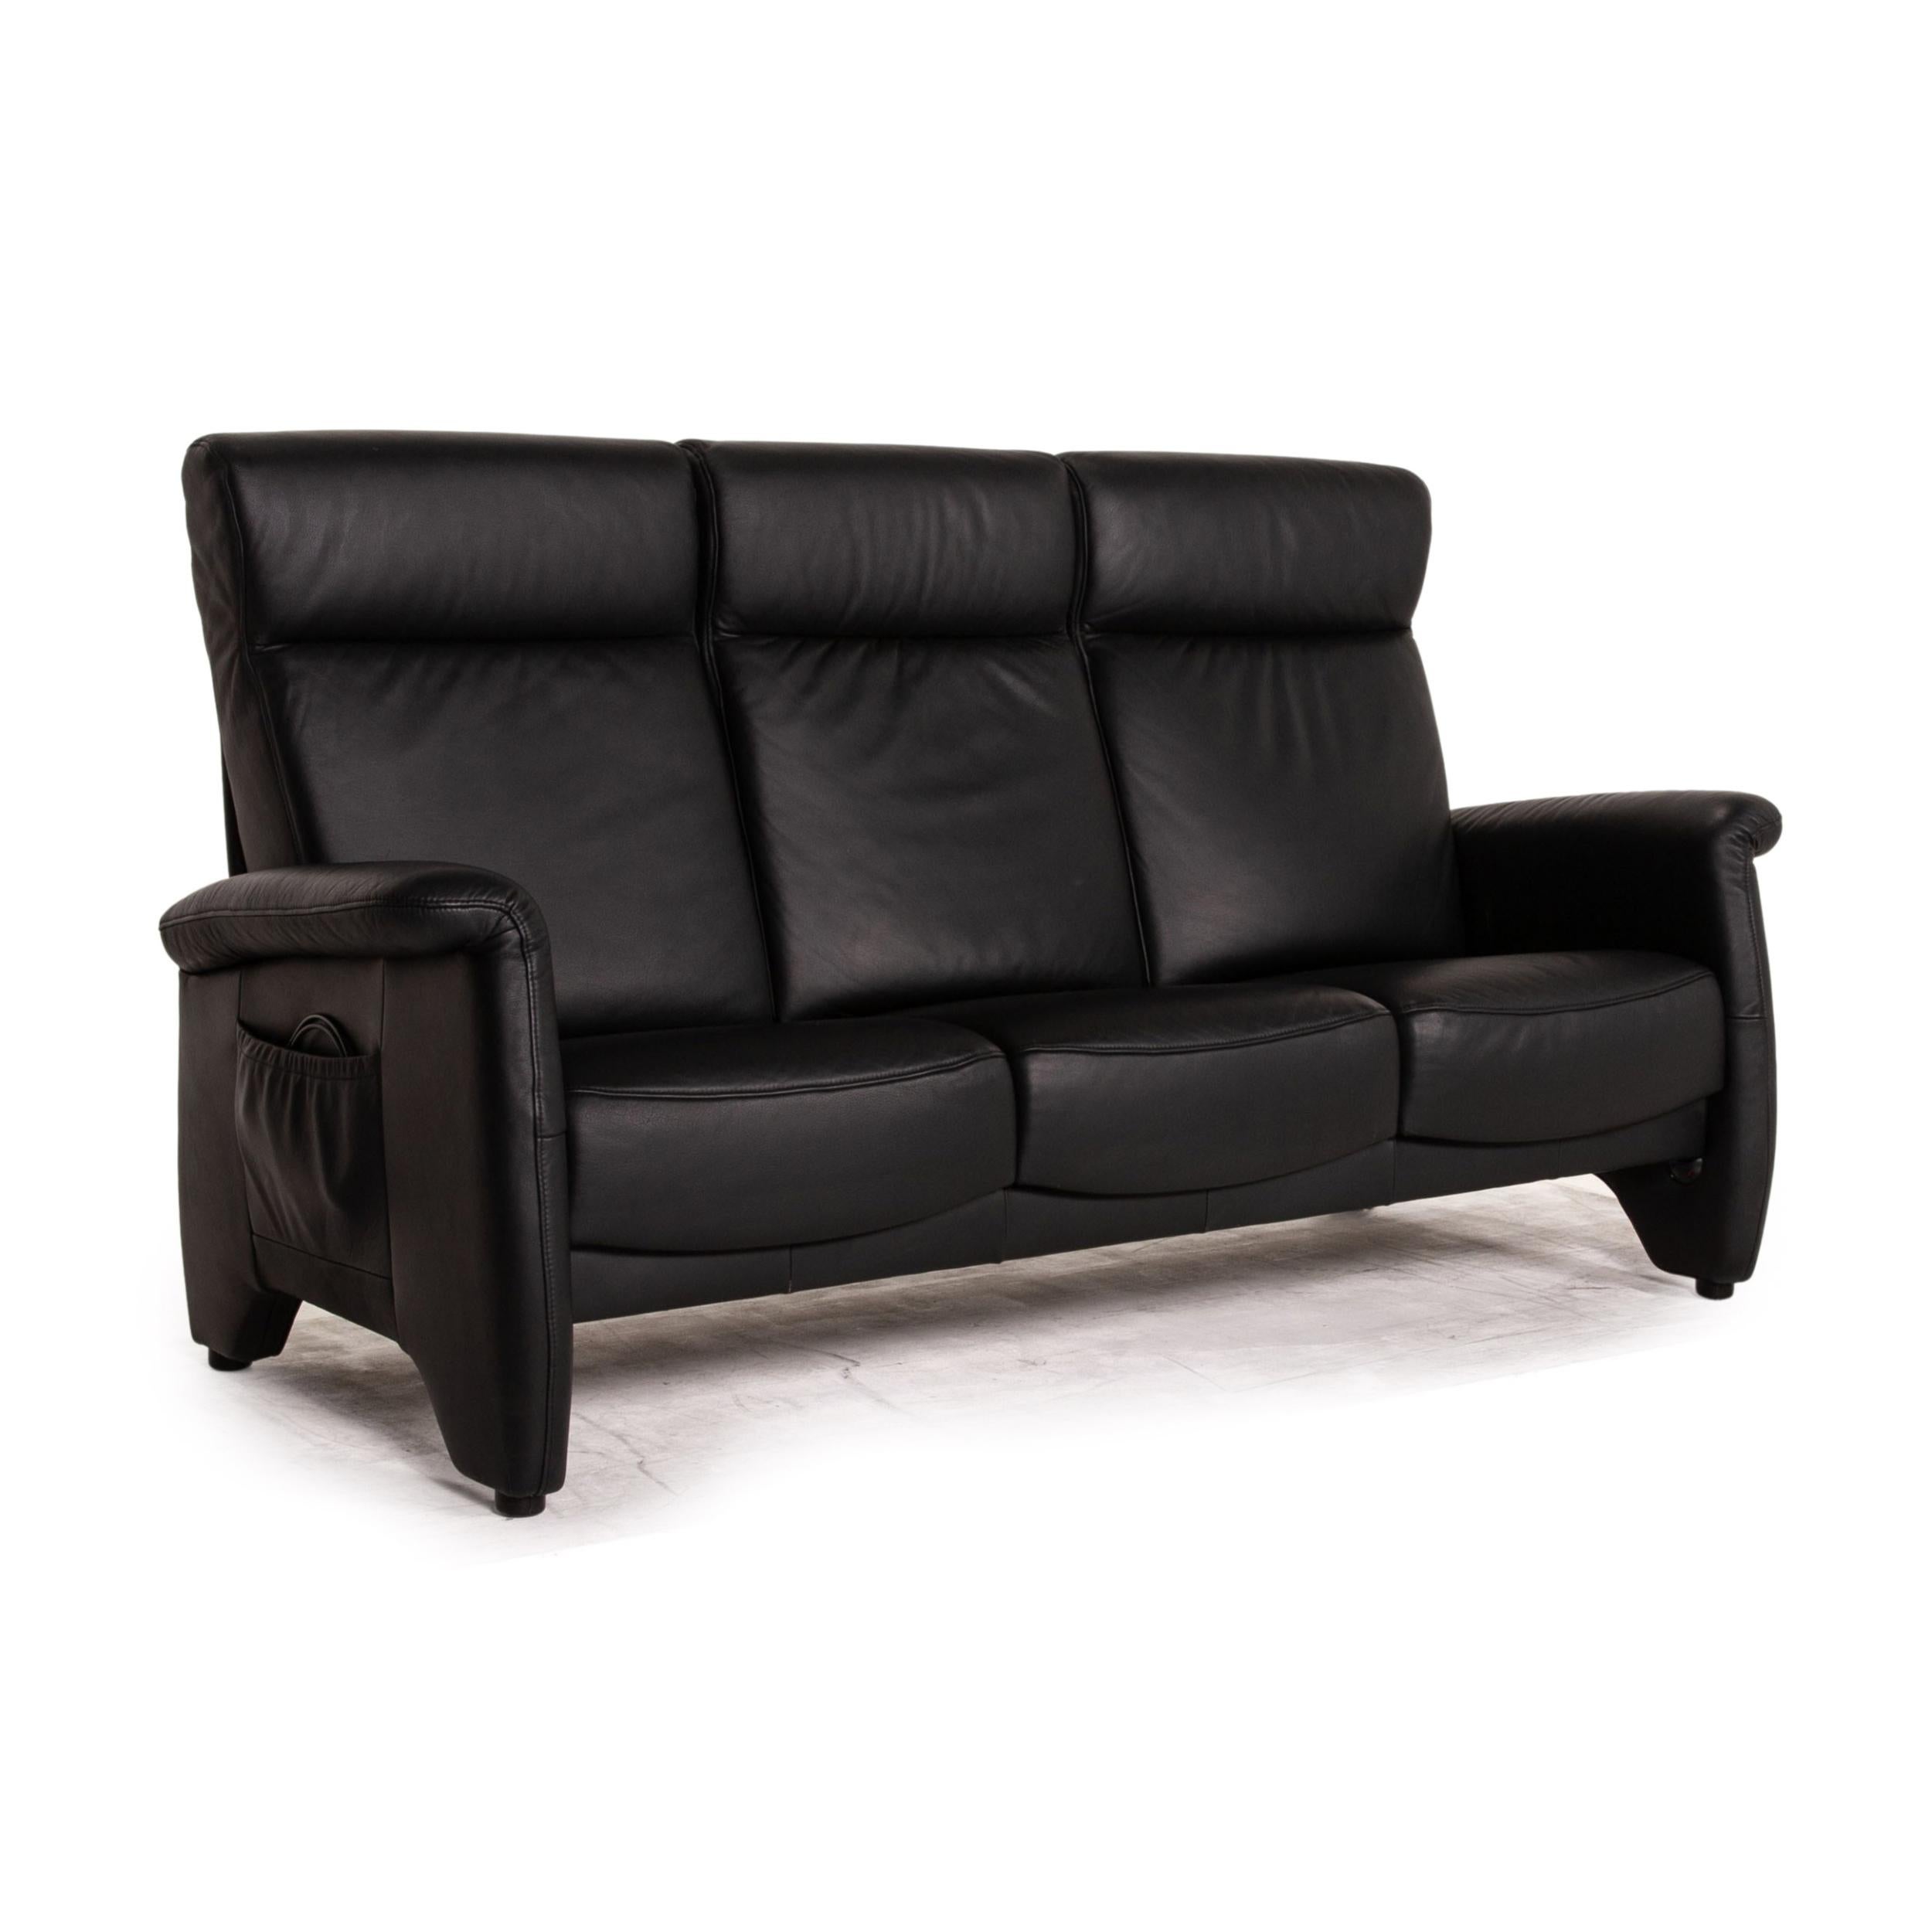 Himolla Ergoline Leather Sofa Black Three Seater Function Couch For Sale 1